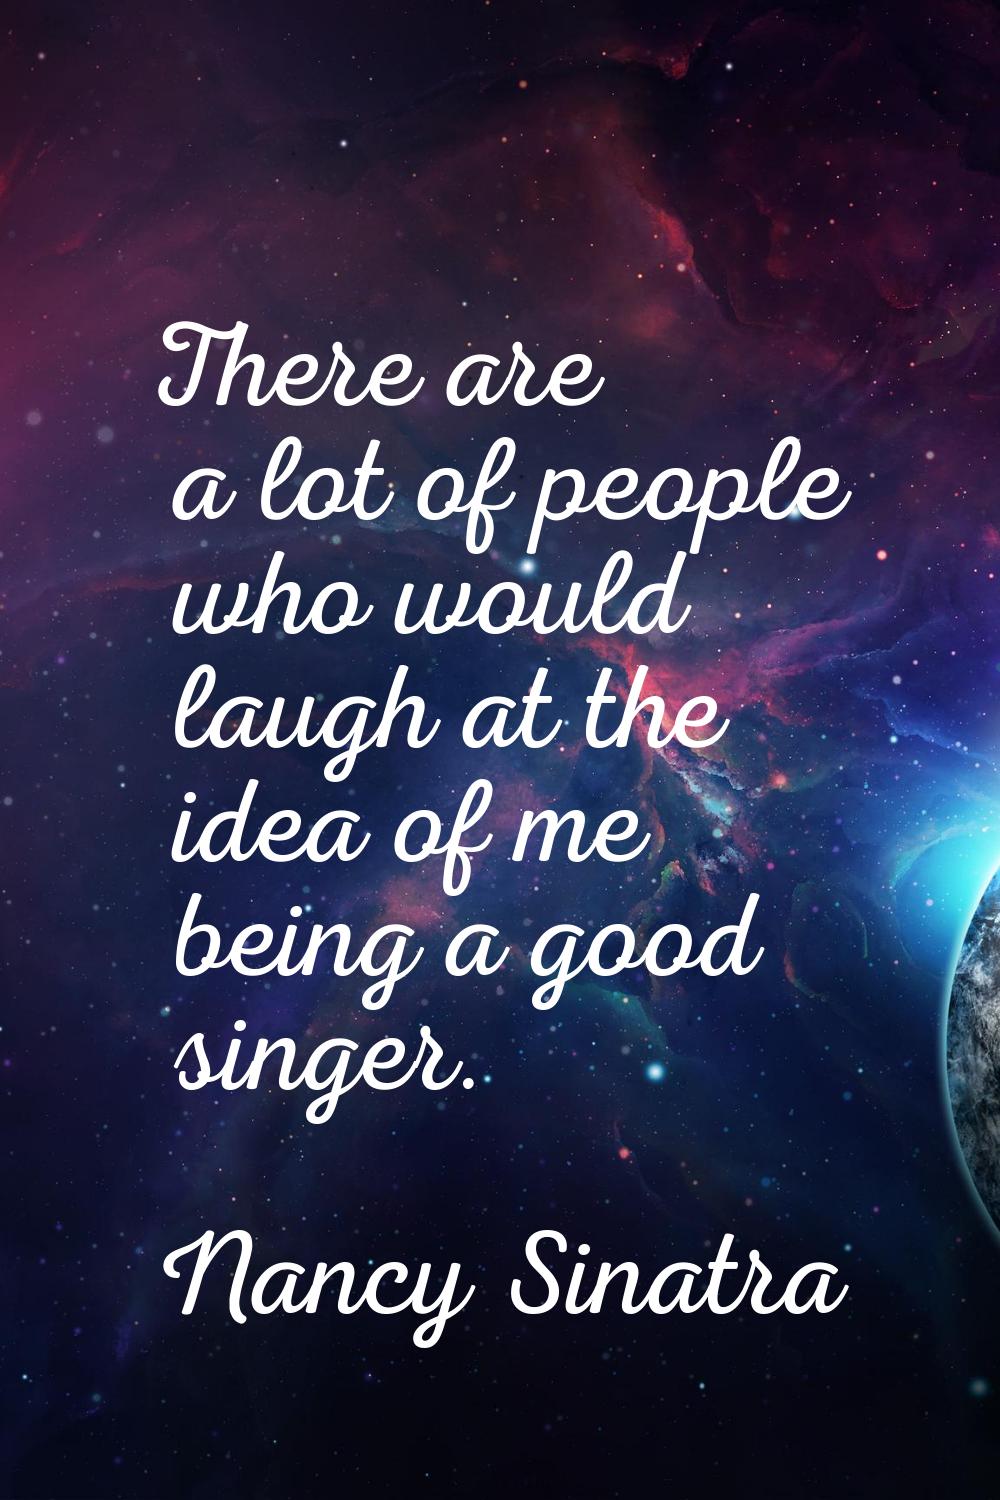 There are a lot of people who would laugh at the idea of me being a good singer.